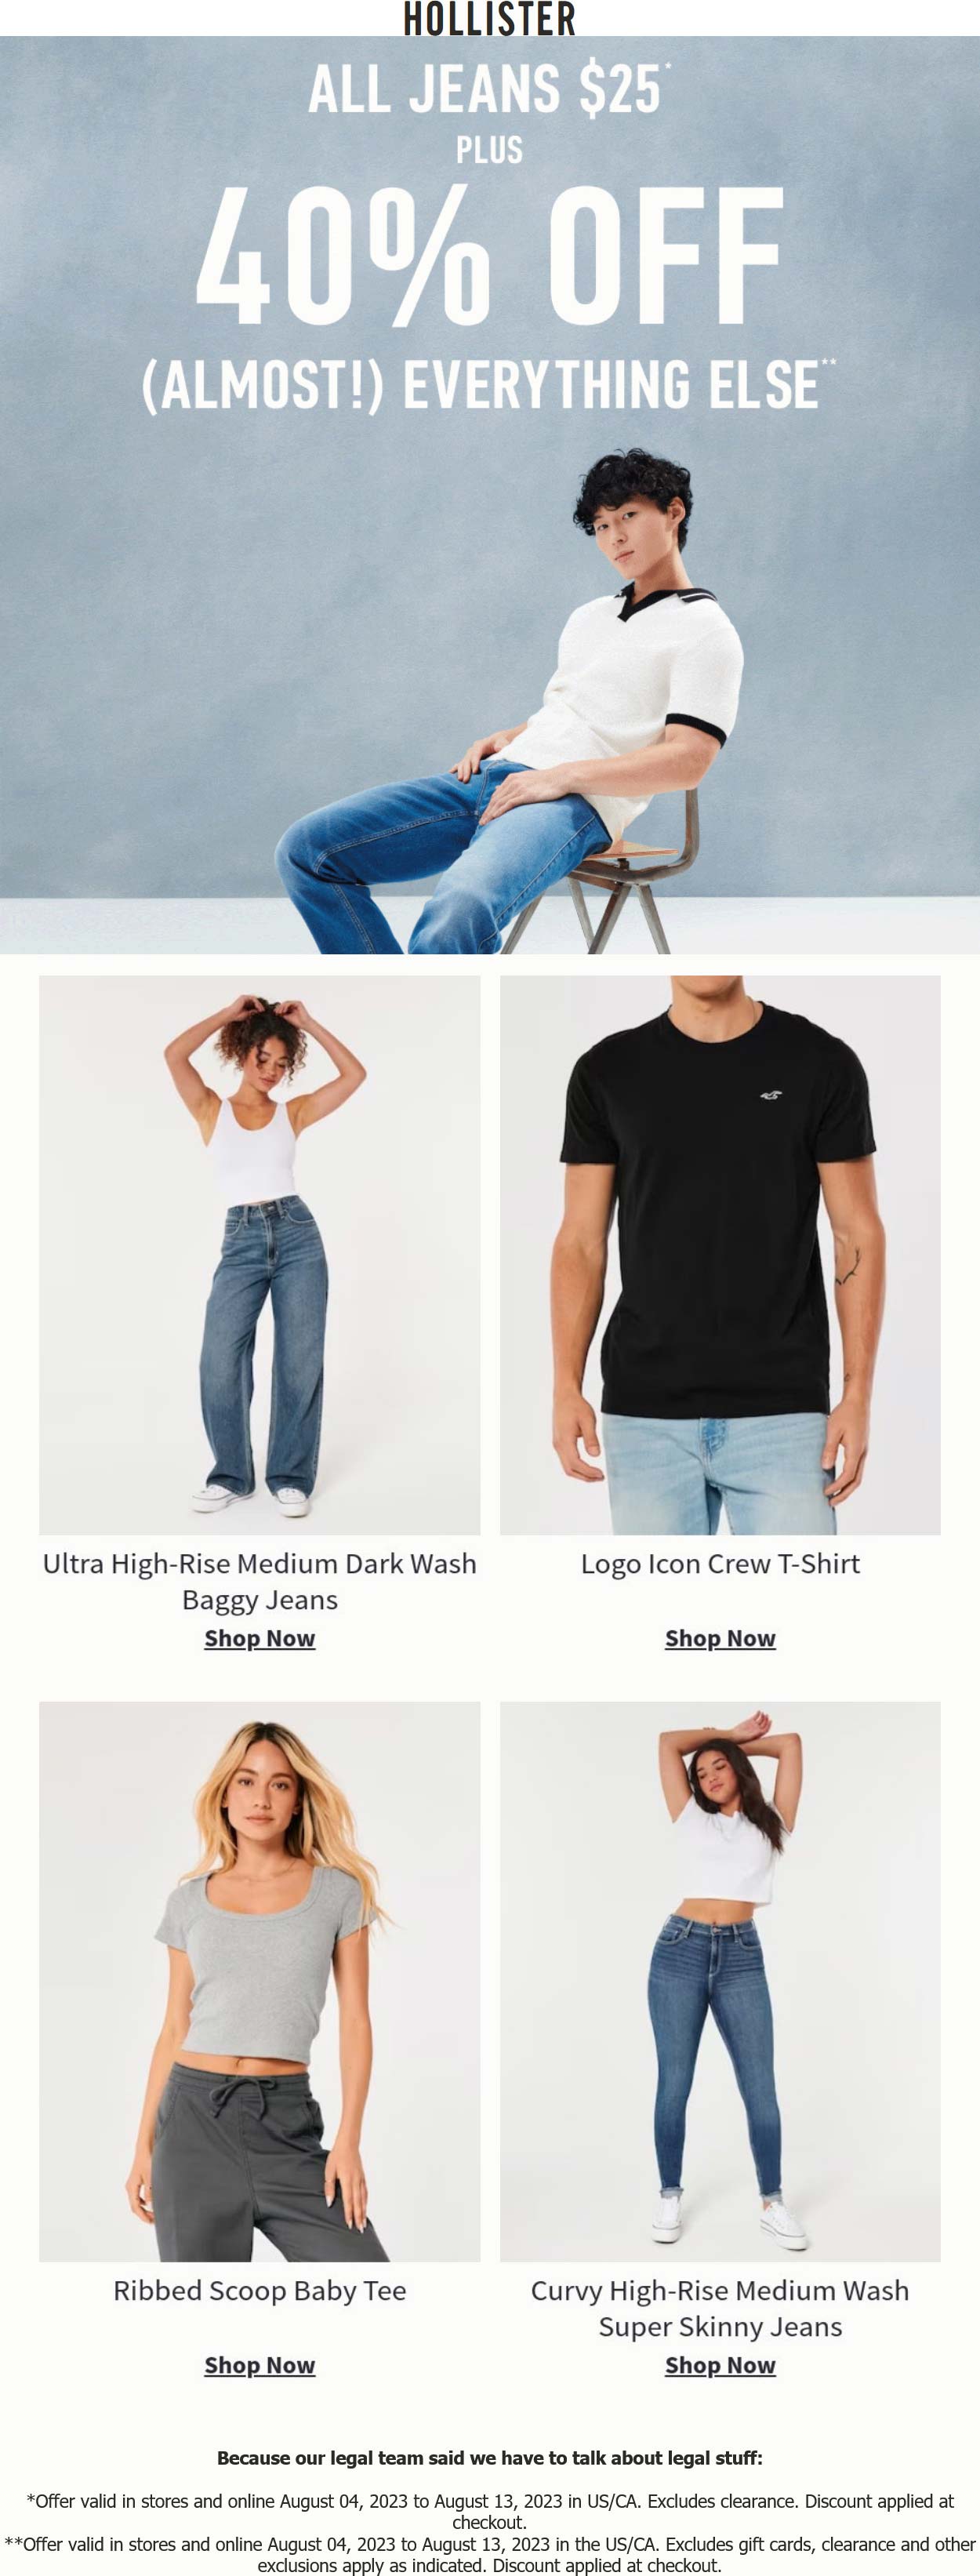 Hollister stores Coupon  40% off everything at Hollister #hollister 